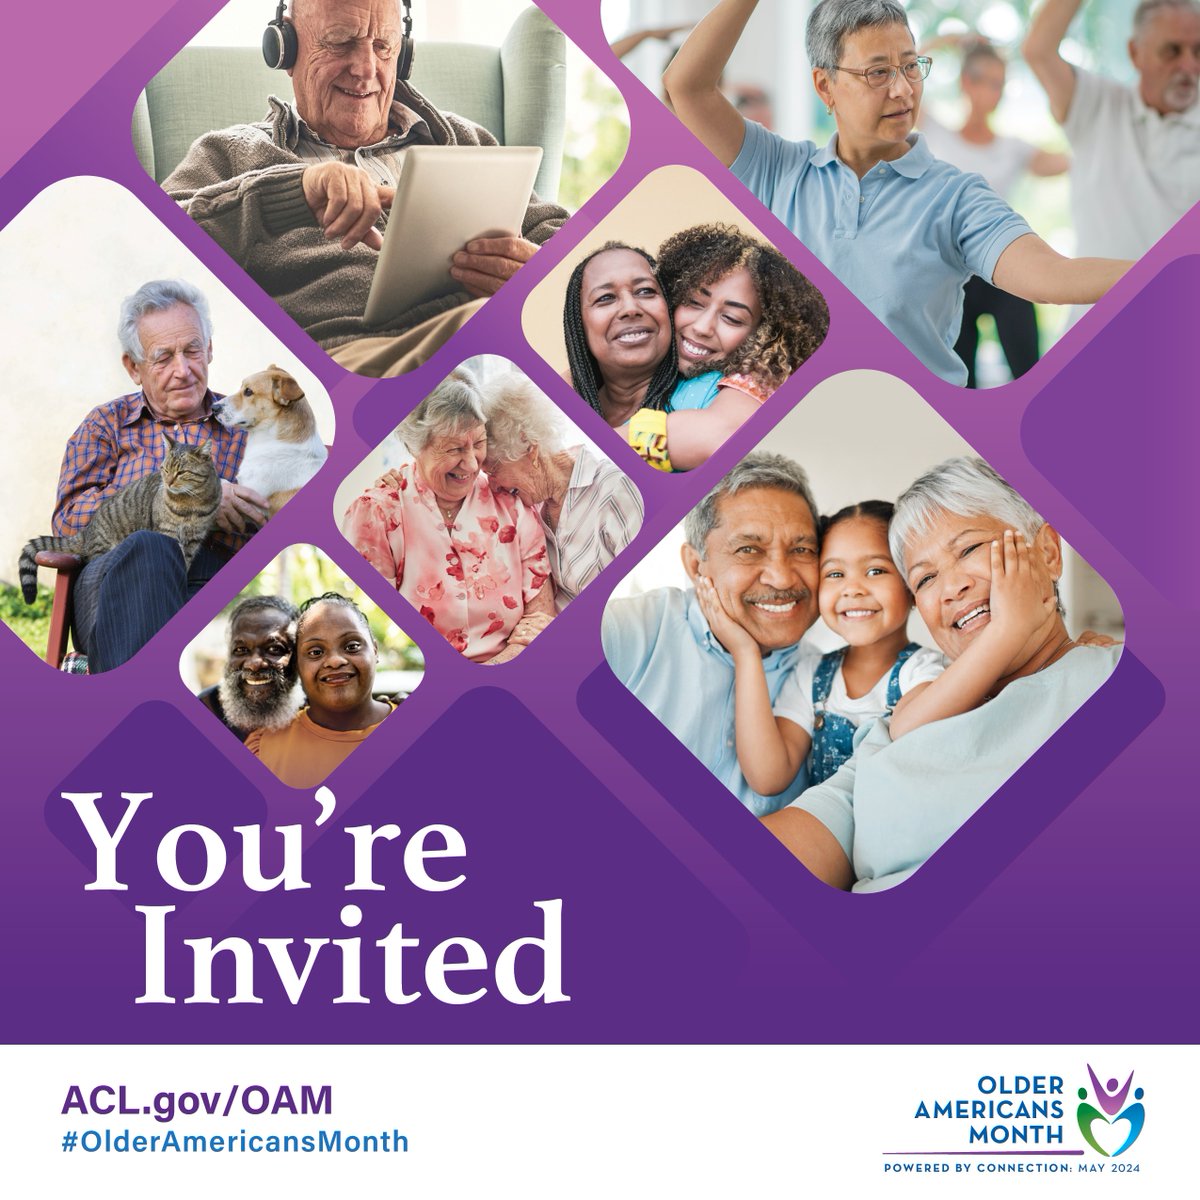 Make #OlderAmericansMonth matter: Learn about leveraging tech to advance social connections for older adults & ppl w/disabilities at the Natl Summit to Increase Social Connections May 14-15 (virtual) @ACL @johnahartford @CTAfoundation @USAging bit.ly/4dnAZJ4